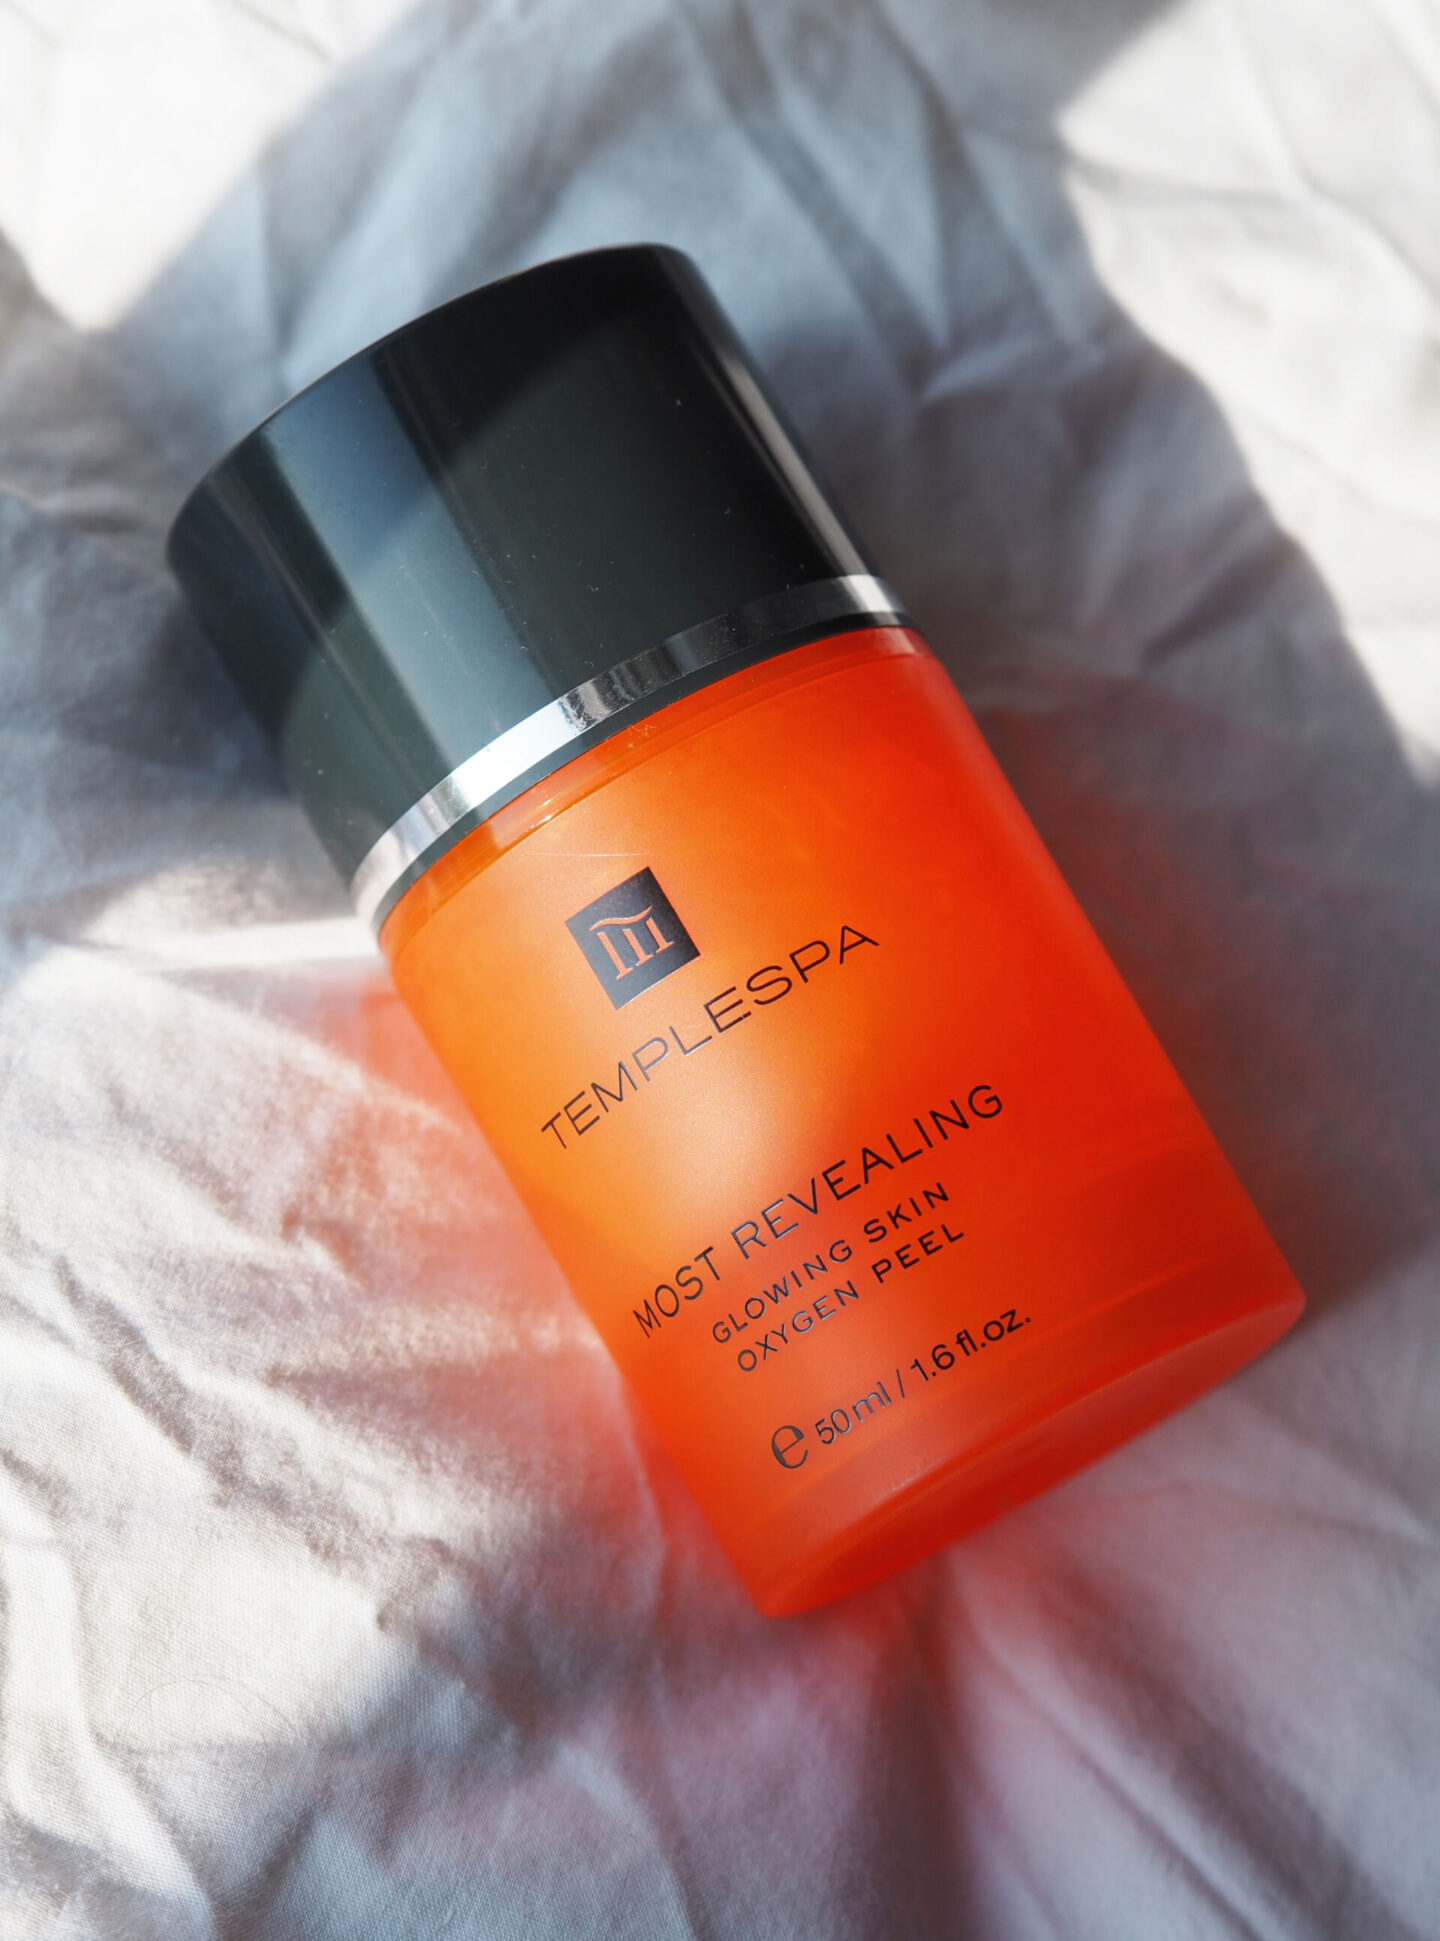 templespa most revealing glowing skin oxygen peel review